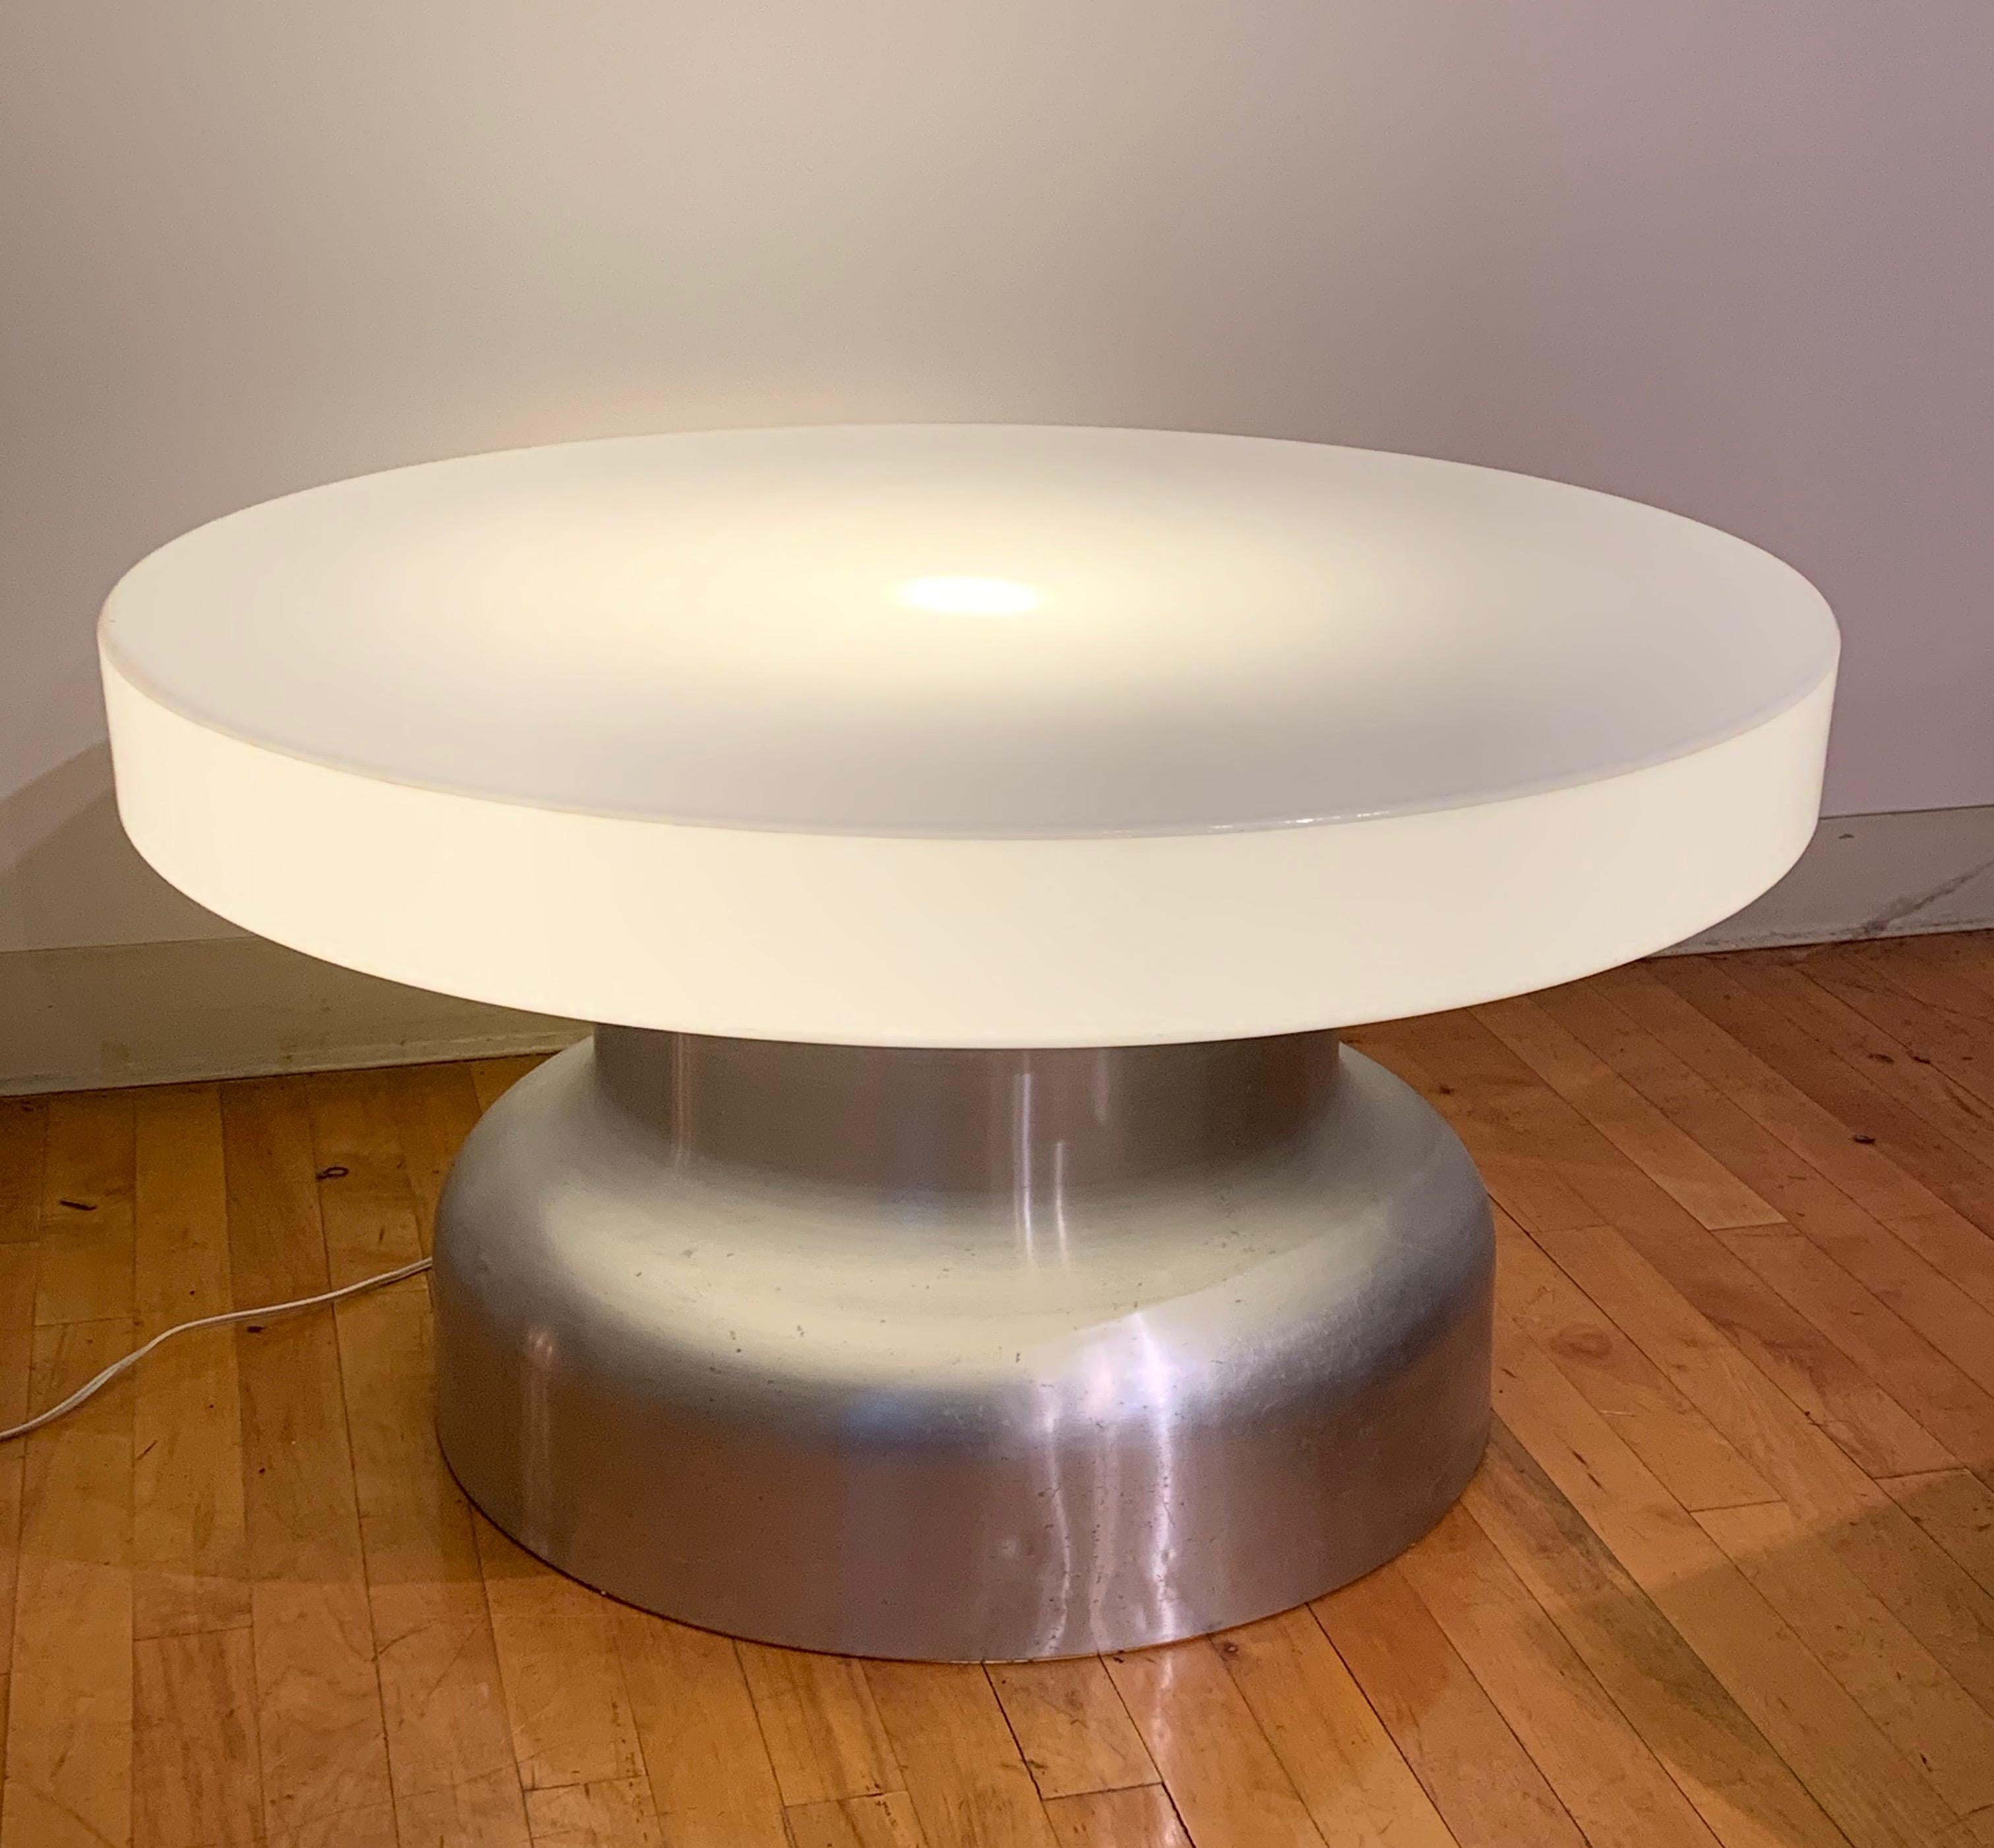 This coffee table from the 1970s has an acrylic top with a brushed aluminum cylindrical base. There is a single lightbulb located in the top. 